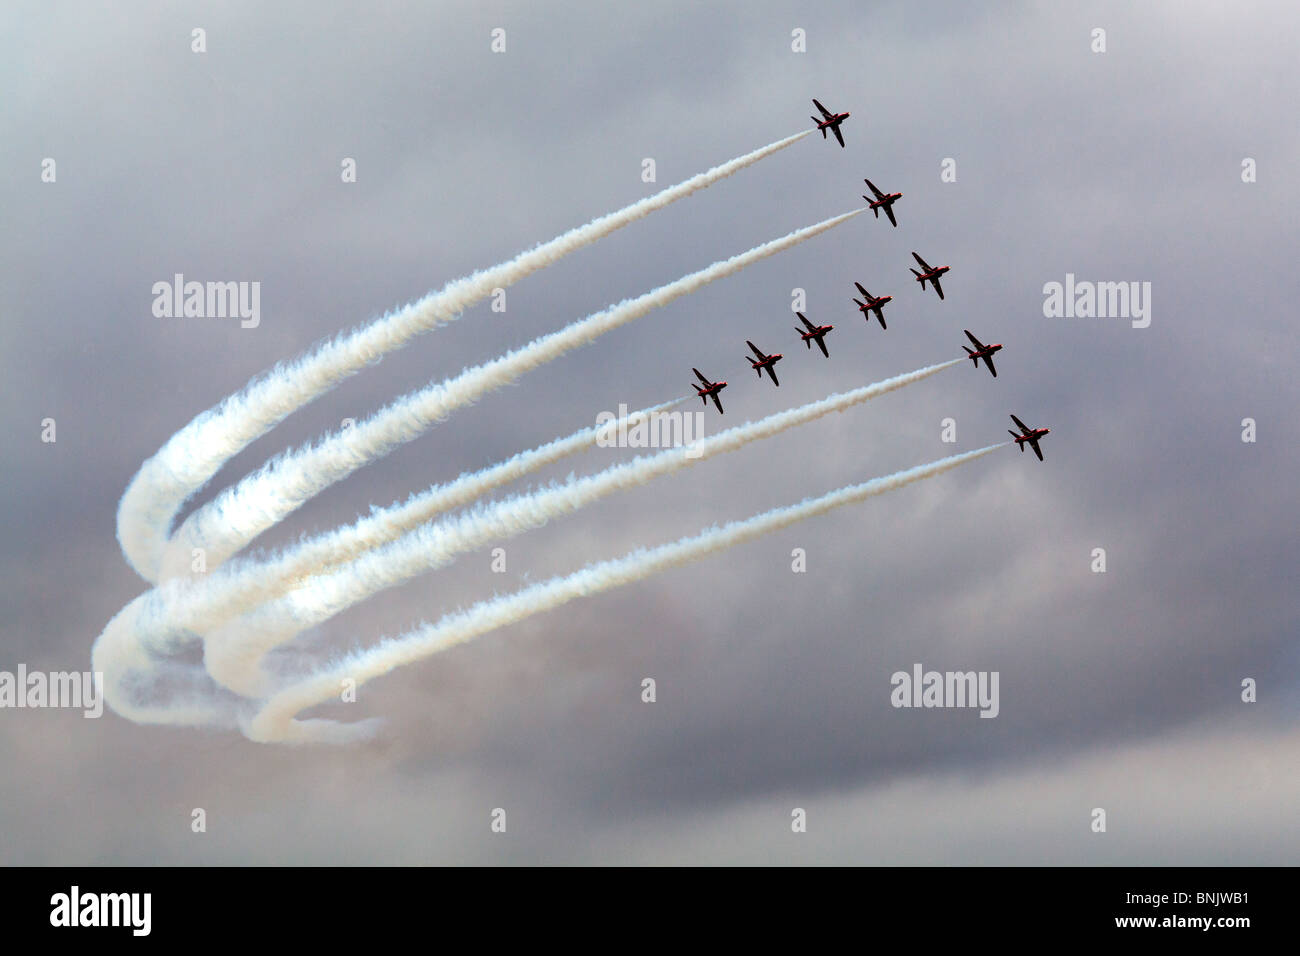 The Red Arrows in T Formation during an air display with white vapour trails showing up clearly against a grey sky at Fairford, Gloucestershire, UK Stock Photo